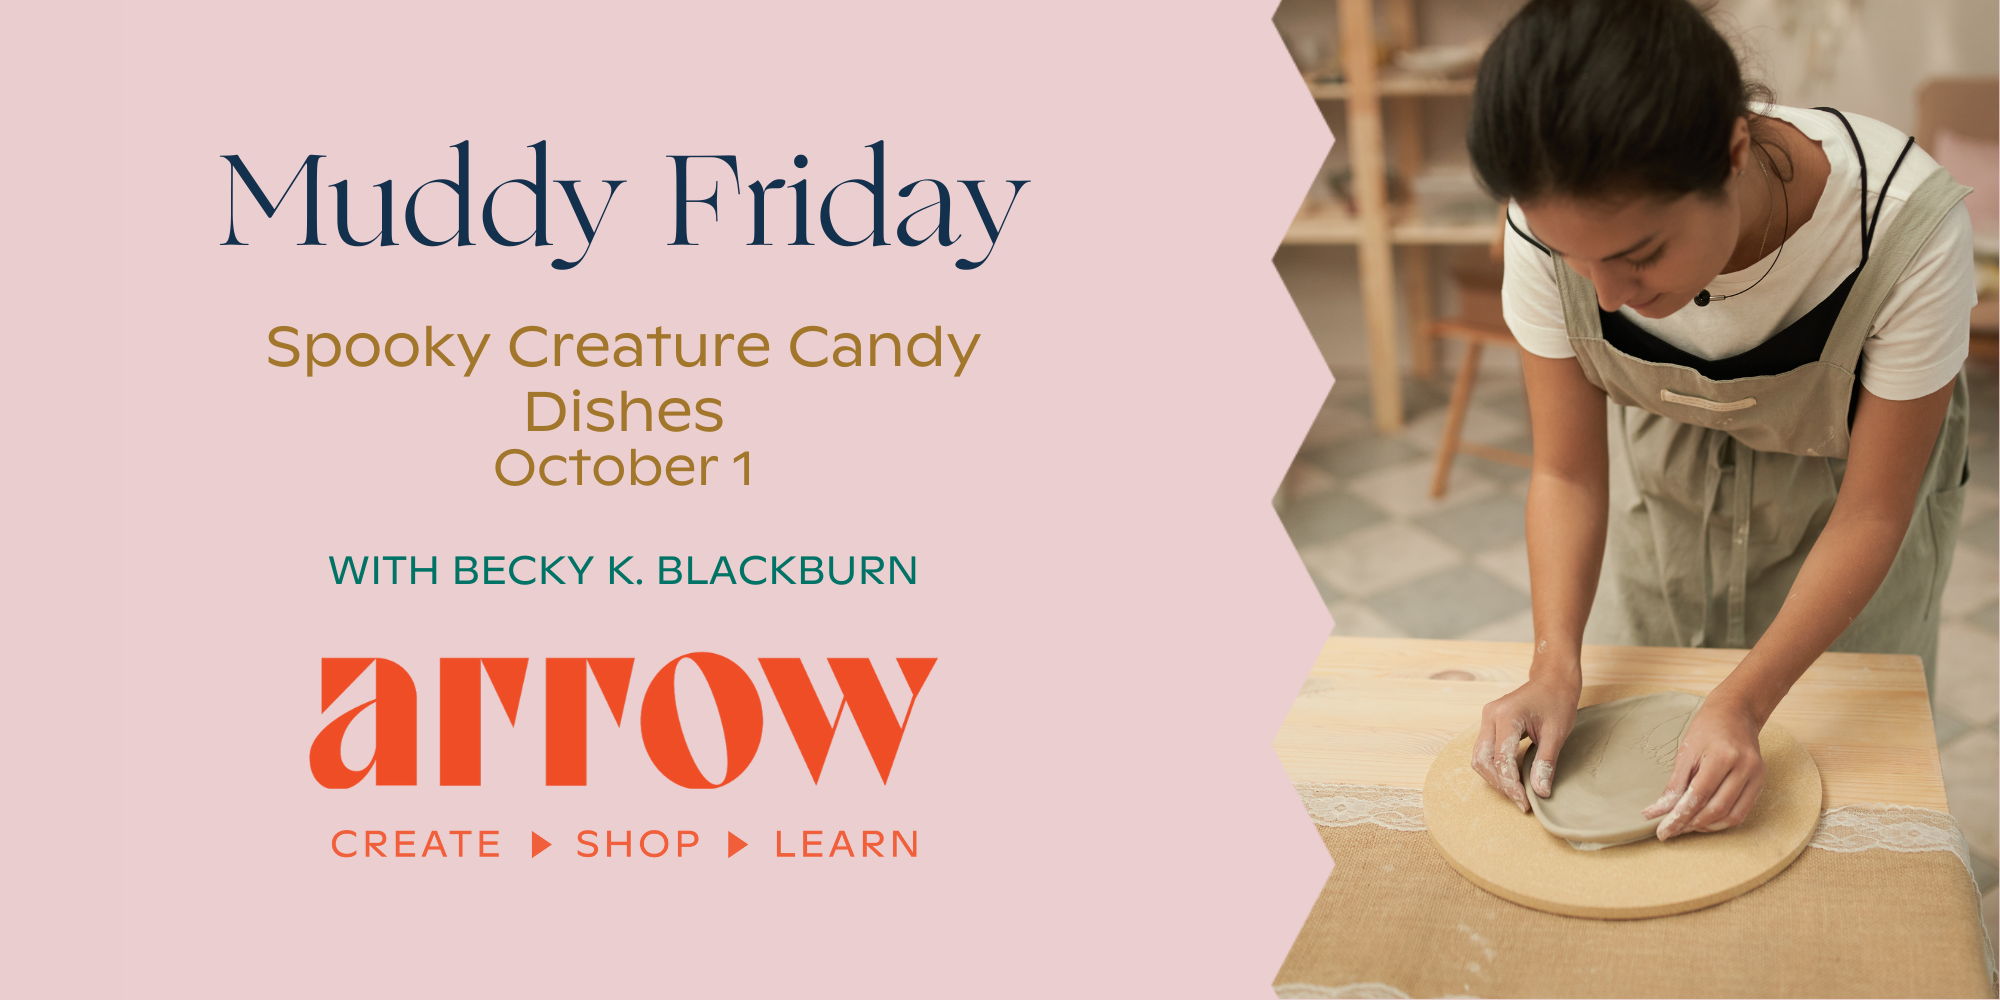 Muddy Friday: Spooky Creature Candy Dishes promotional image